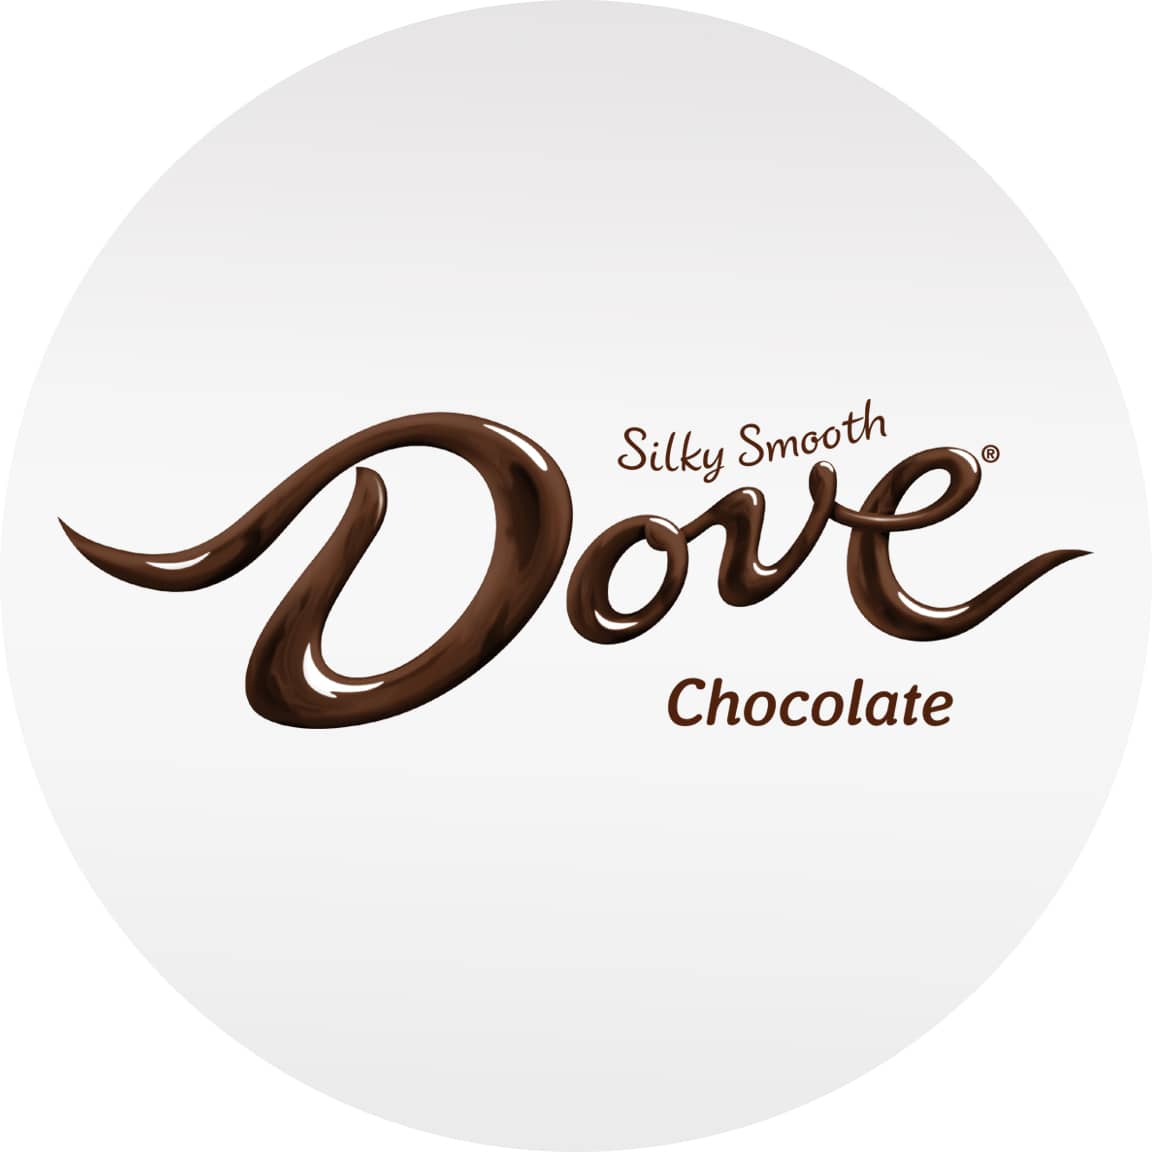 Shop for Dove® brand chocolate 